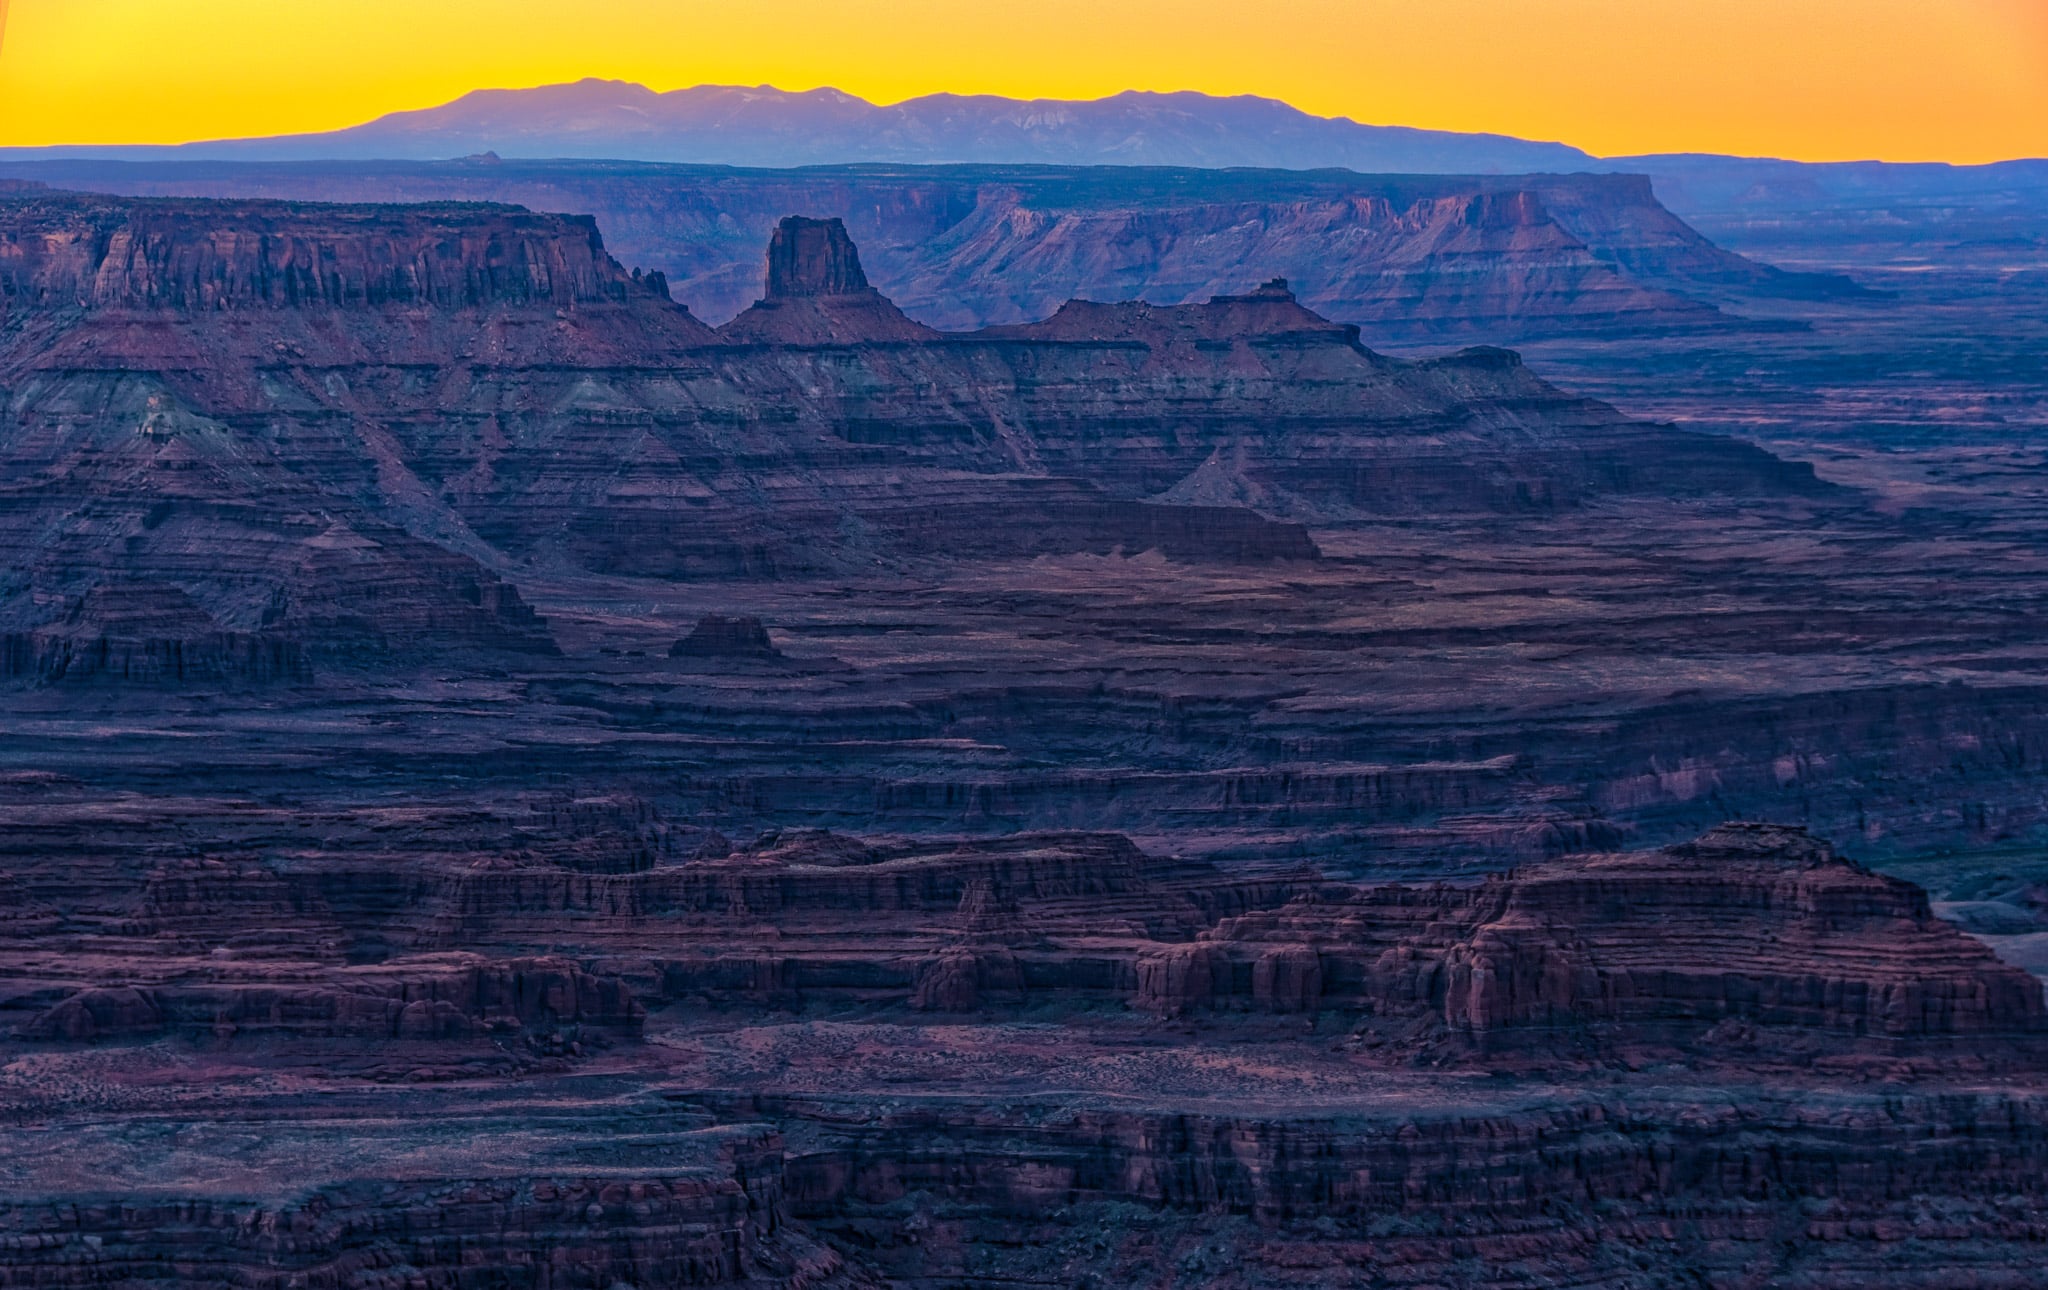 Looking south, just before sunrise, from Dead Horse Point, near Moab, Utah.